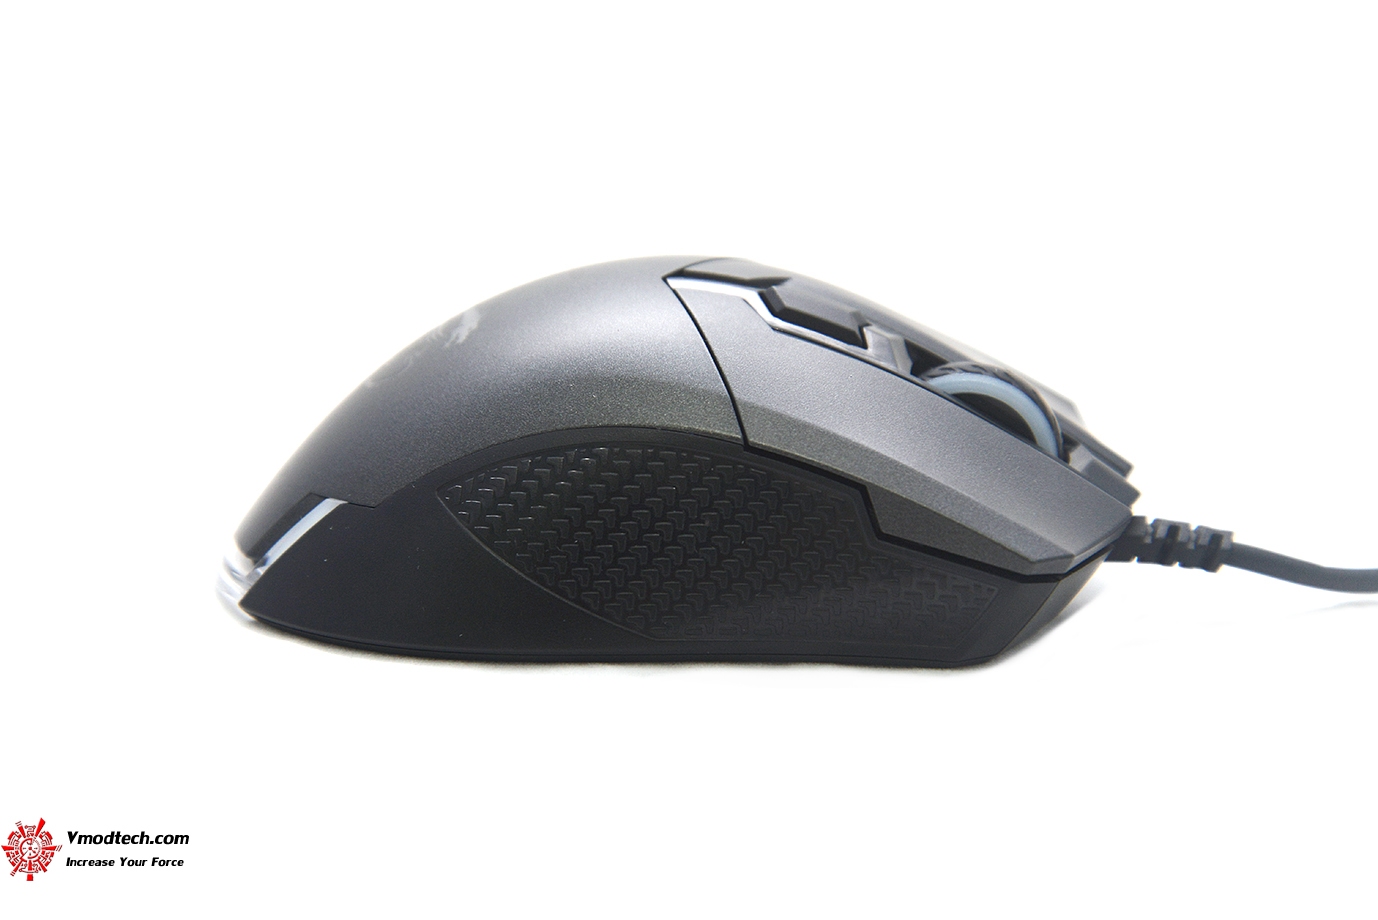 dsc 4912 MSI CLUTCH GM50 GAMING MOUSE REVIEW